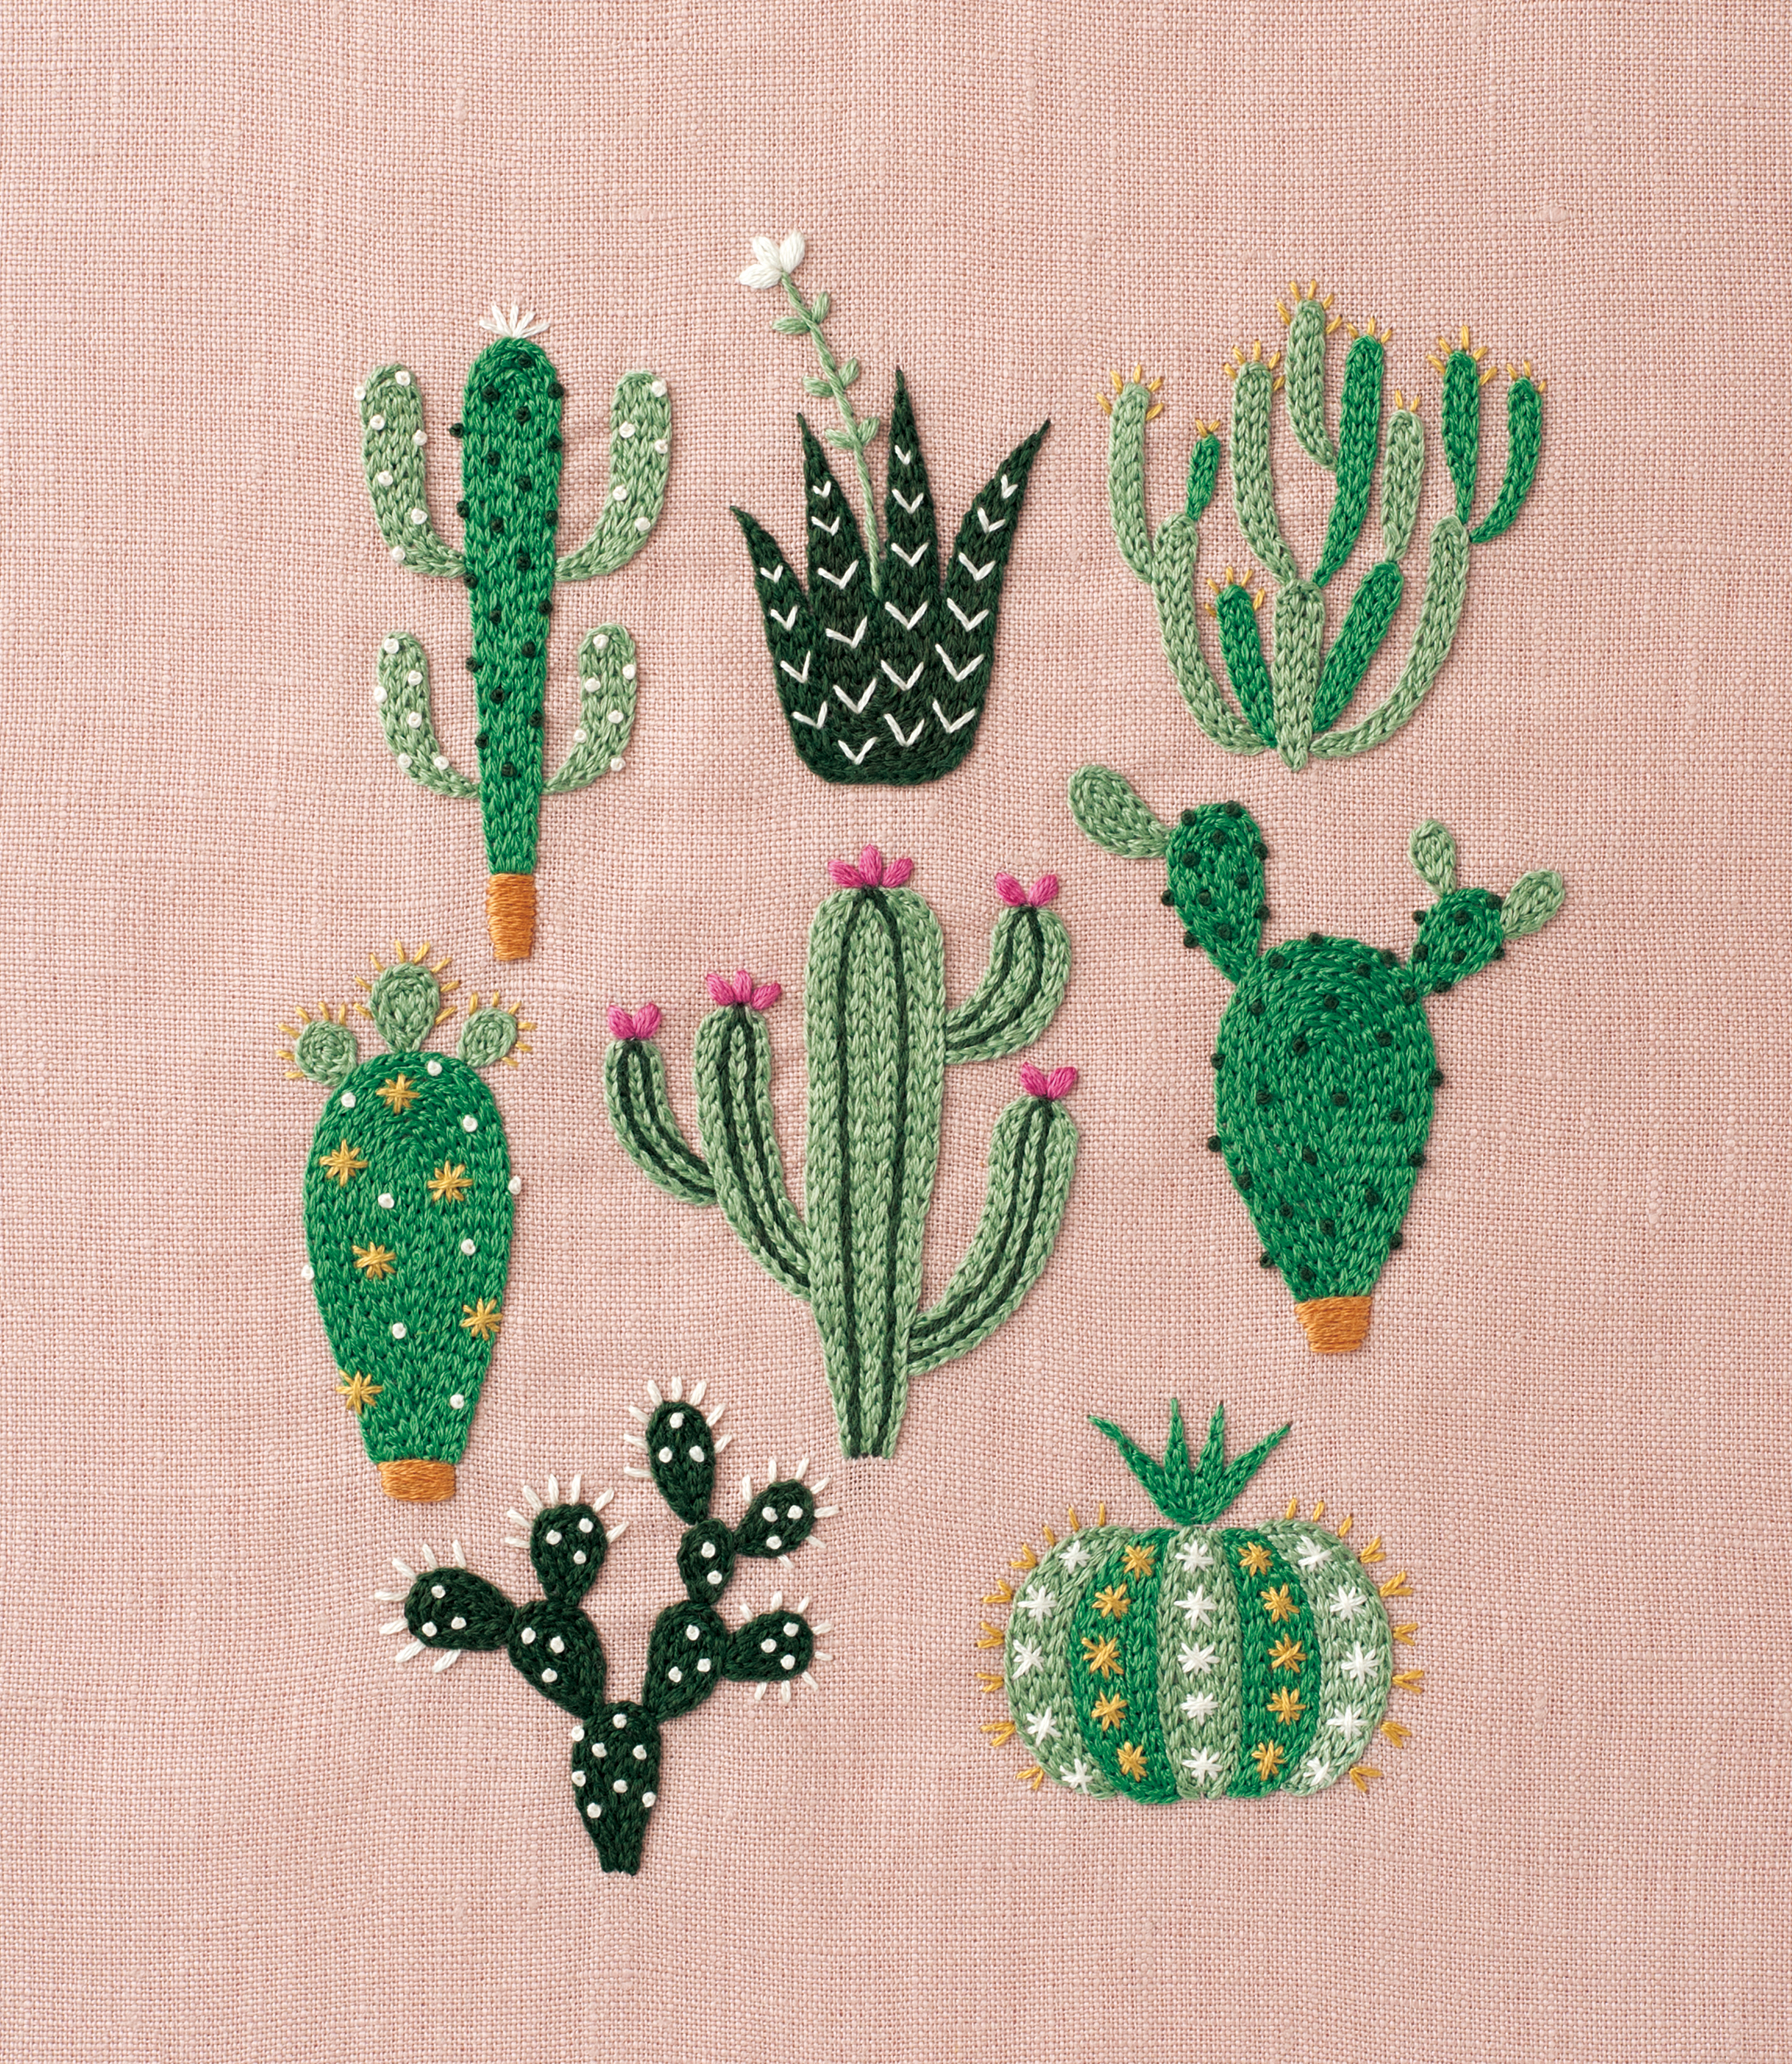 How To Create Embroidery Patterns Diy Floral Cactus Embroidery Projects From A Year Of Embroidery